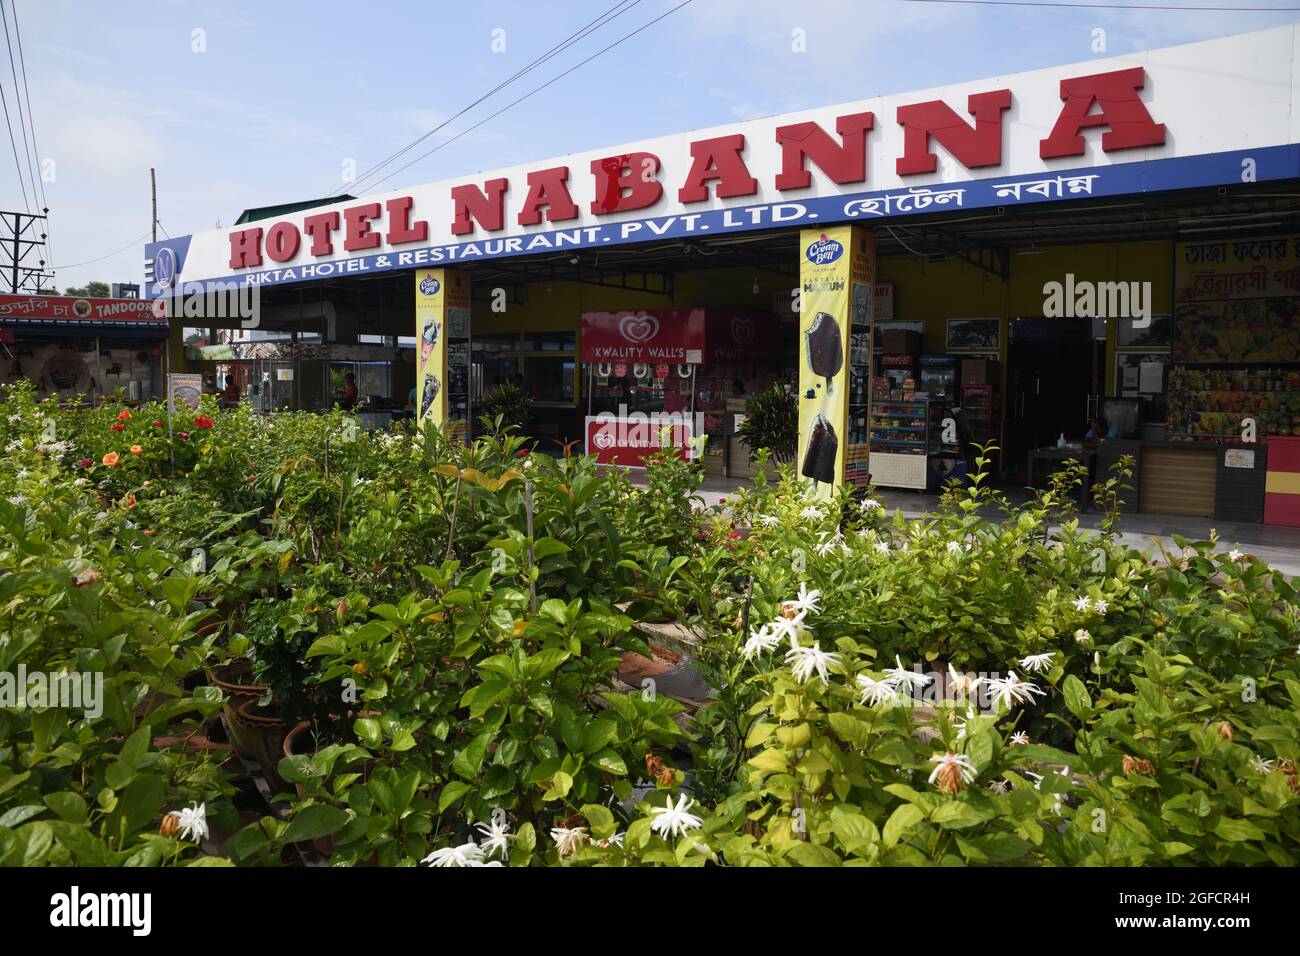 Hotel Nabanna. A restaurant at Singur, National Highway 16, Hooghly, West Bengal, India. Stock Photo